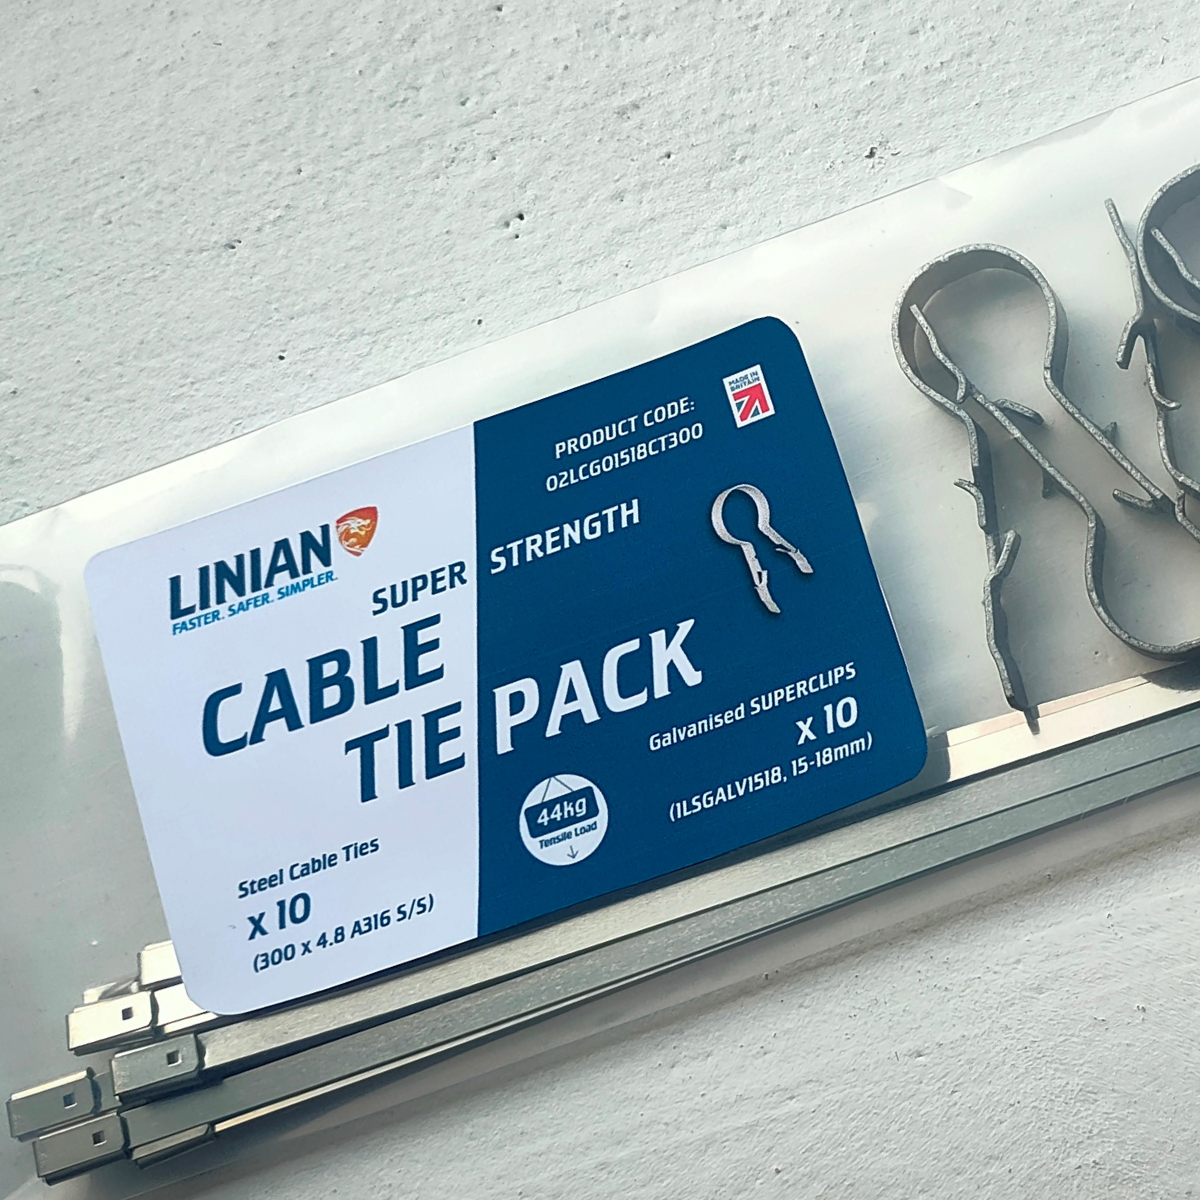 LINIAN Super Strength CABLE TIE PACK